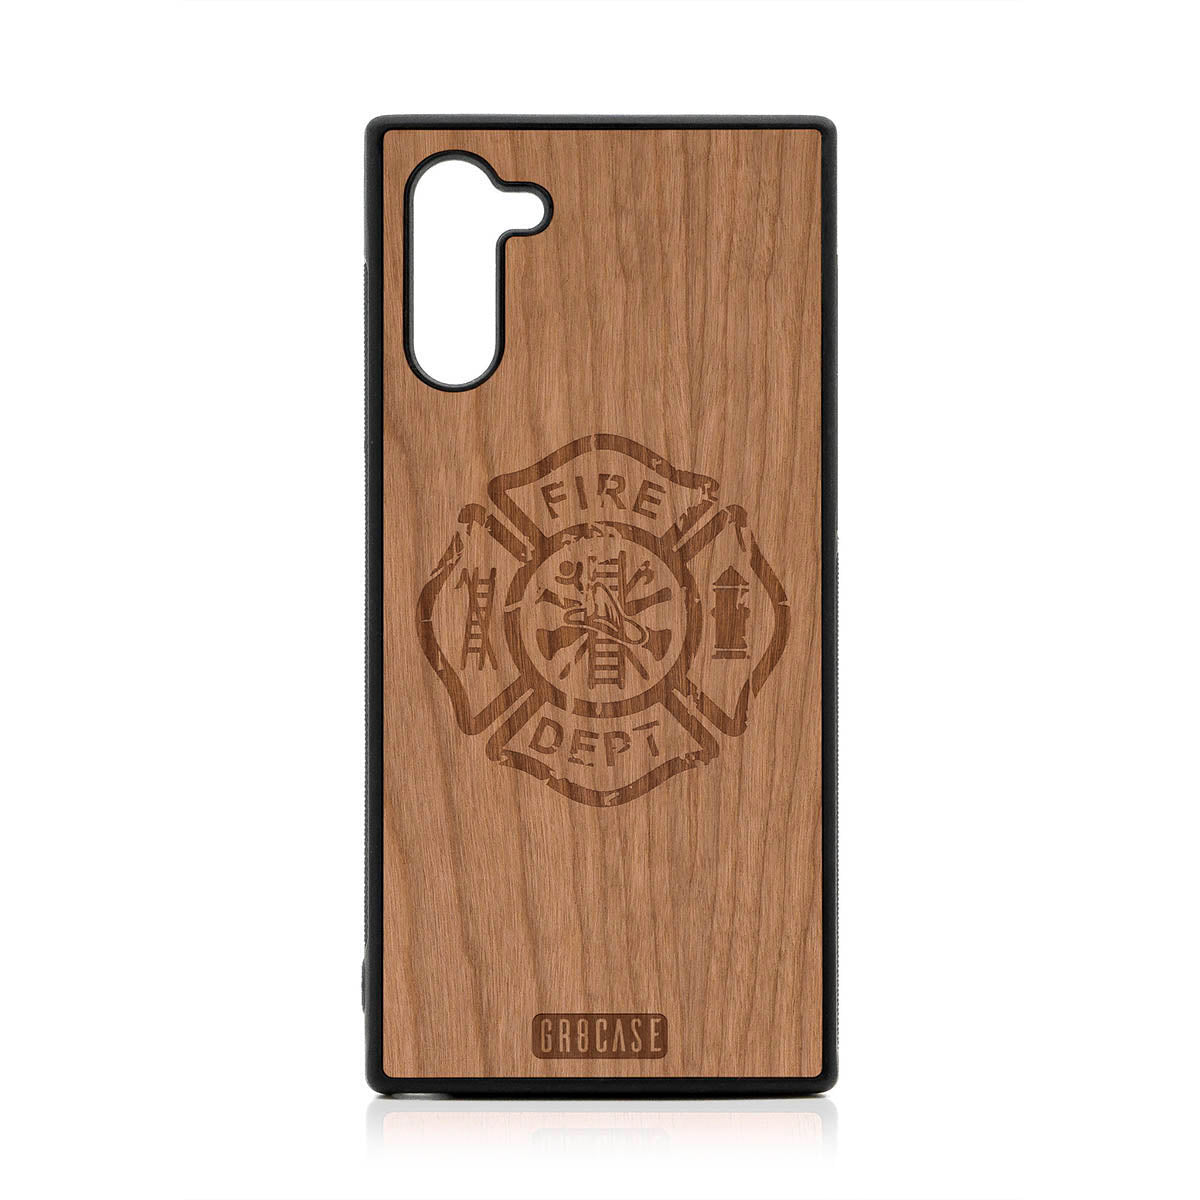 Fire Department Design Wood Case Samsung Galaxy Note 10 by GR8CASE